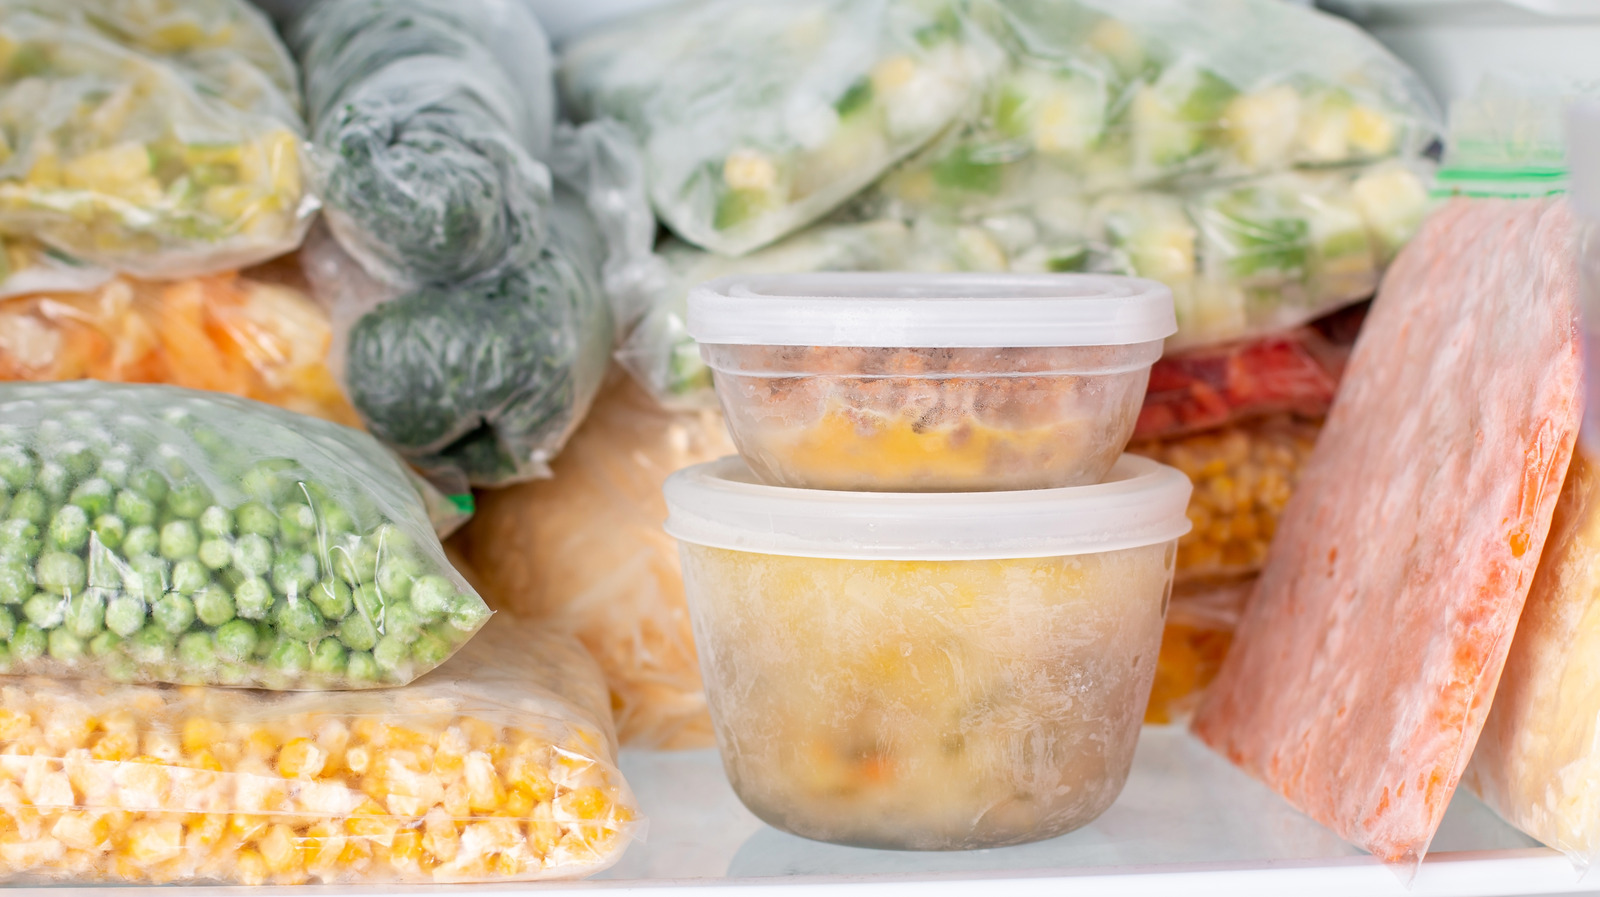 Is It Safe To Freeze Food In Plastic Containers?